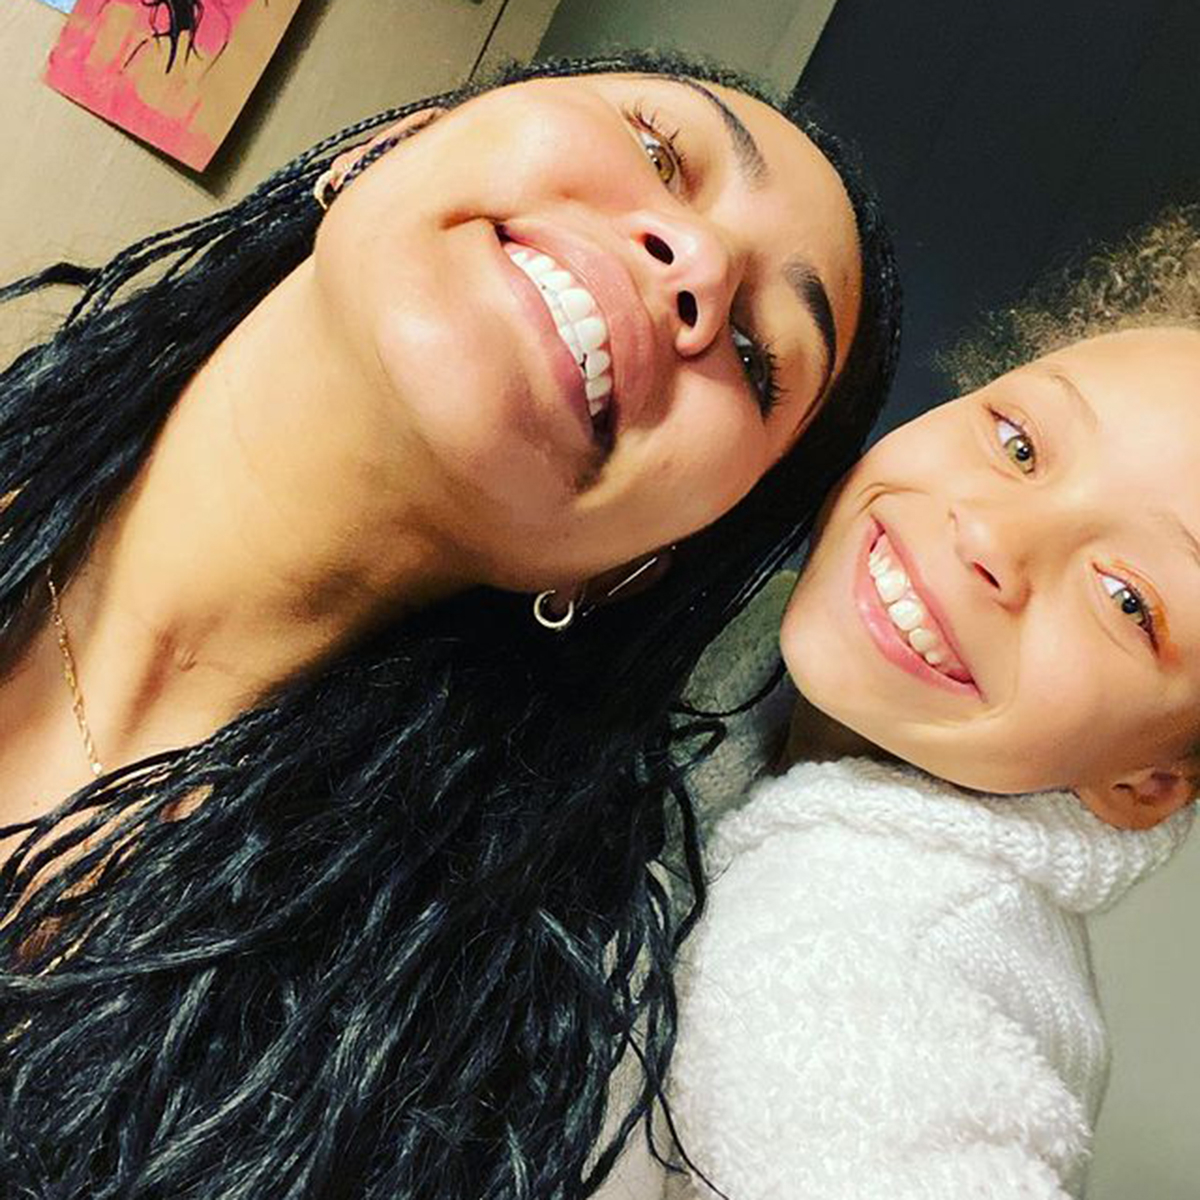 Ayesha Curry reflects on regrets of Riley Curry's media frenzy